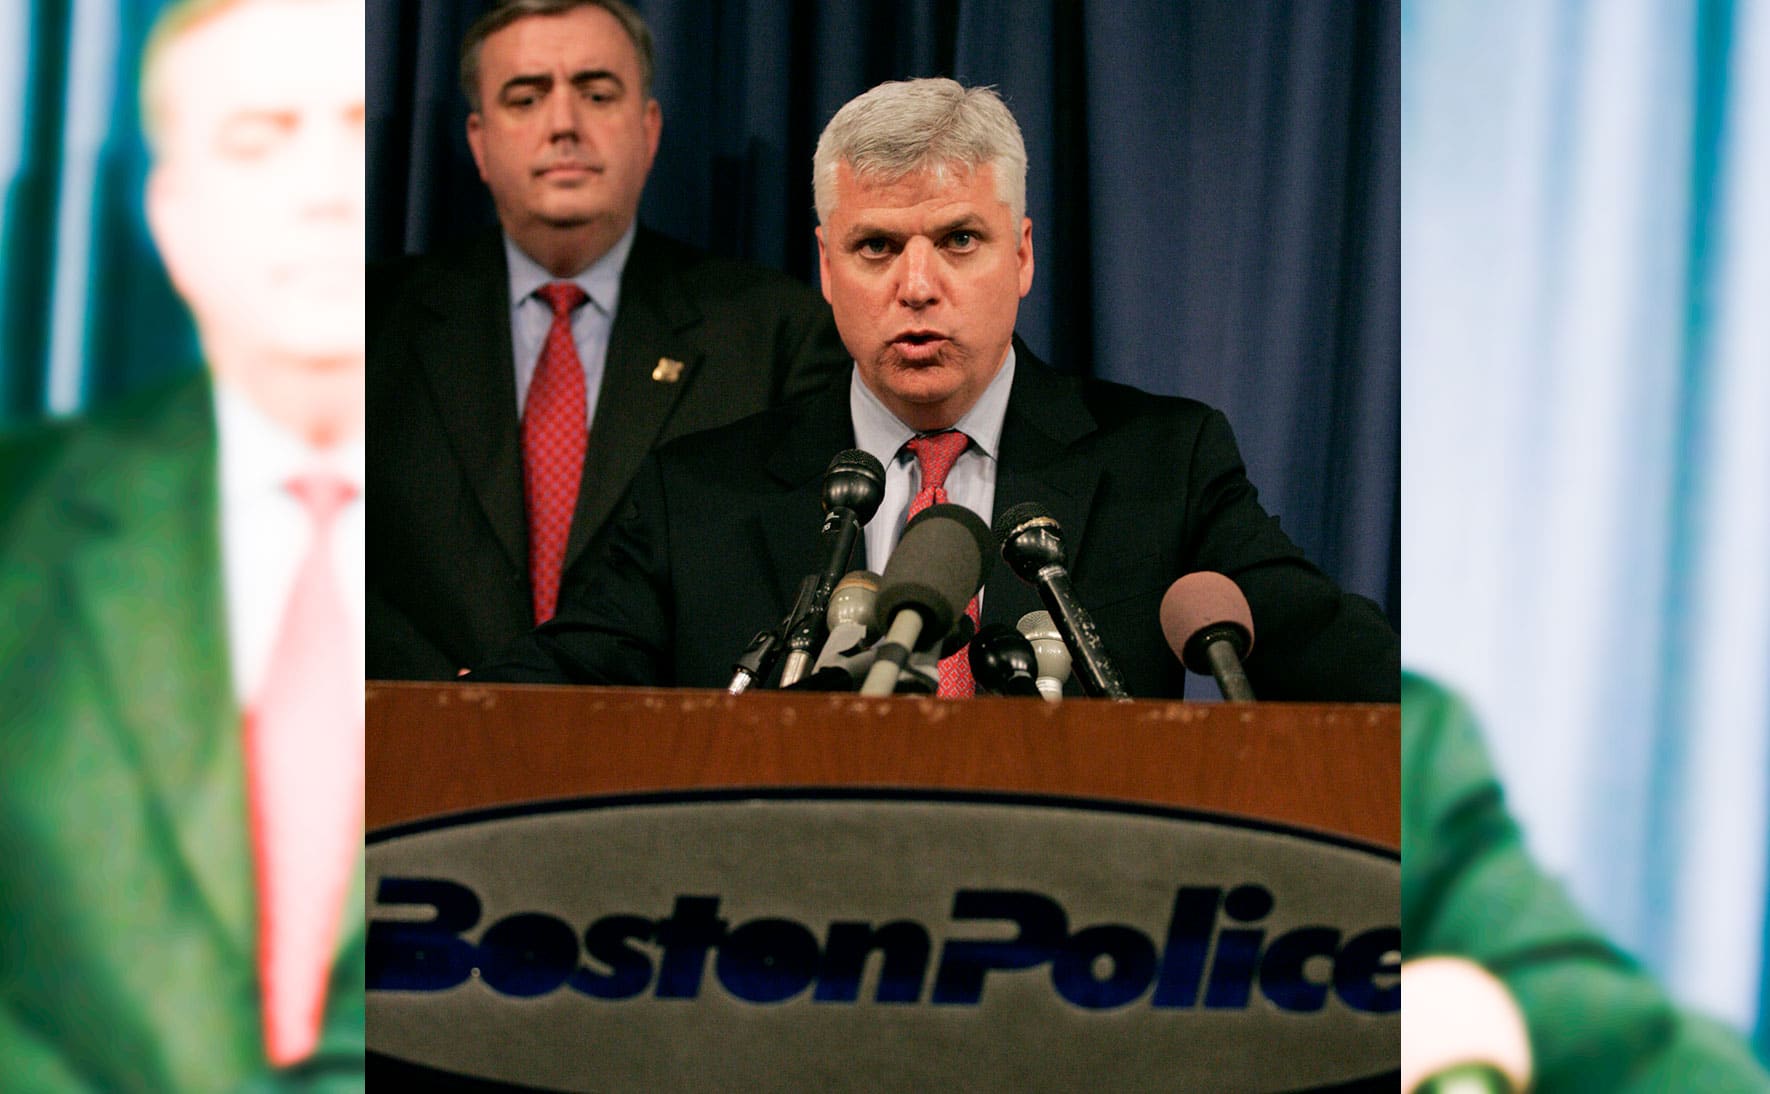 The Boston Police Commissioner announces the arrest of Markoff.